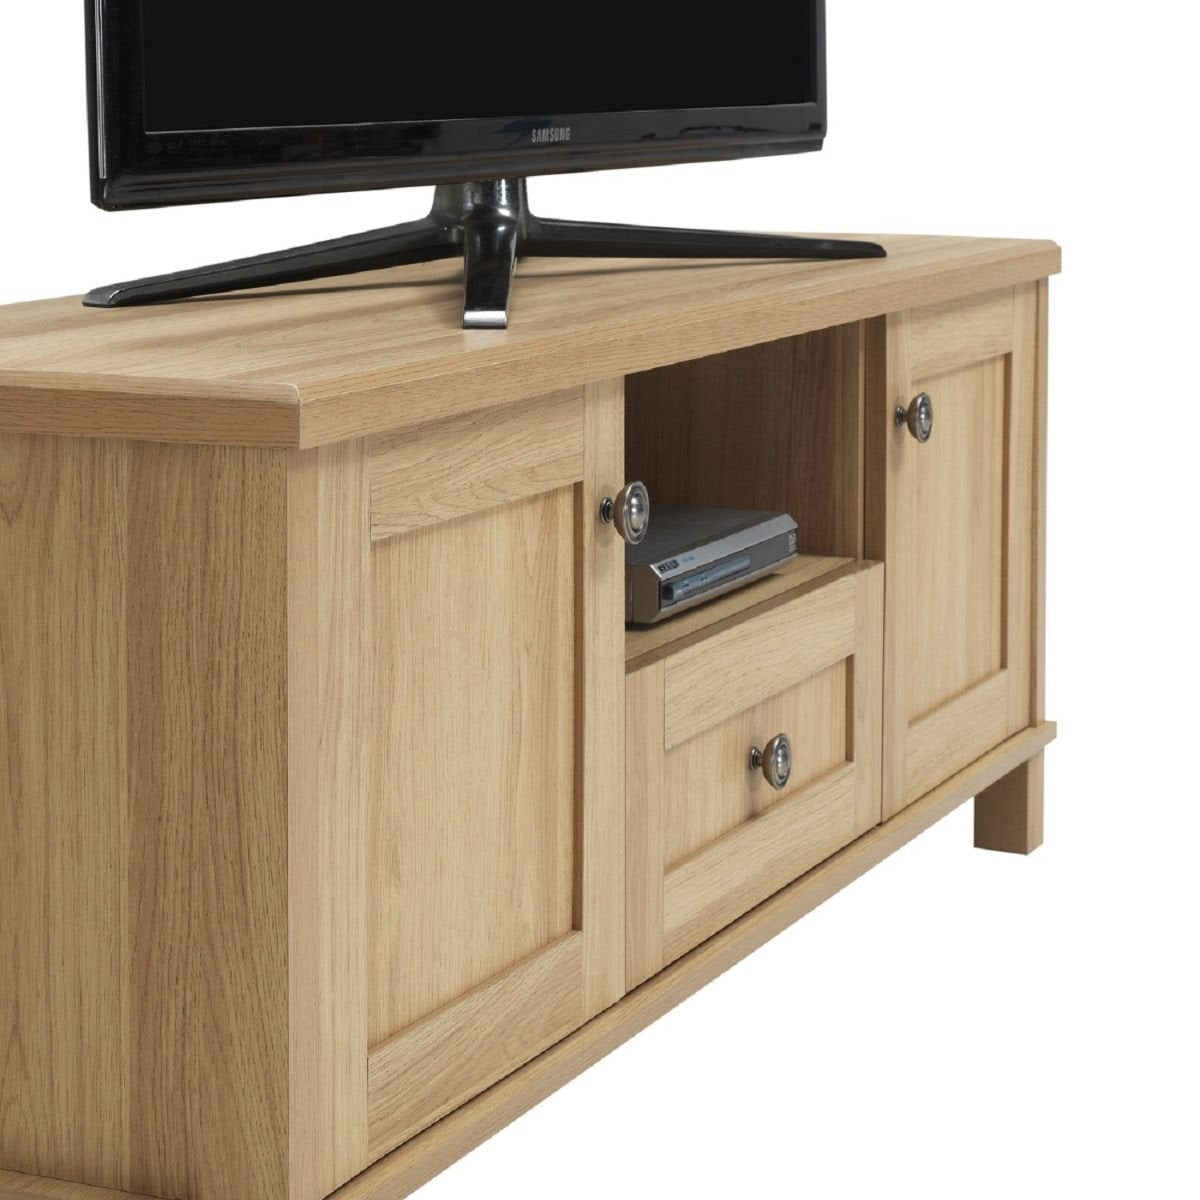 Side Look Of Solid Wood TV Stand